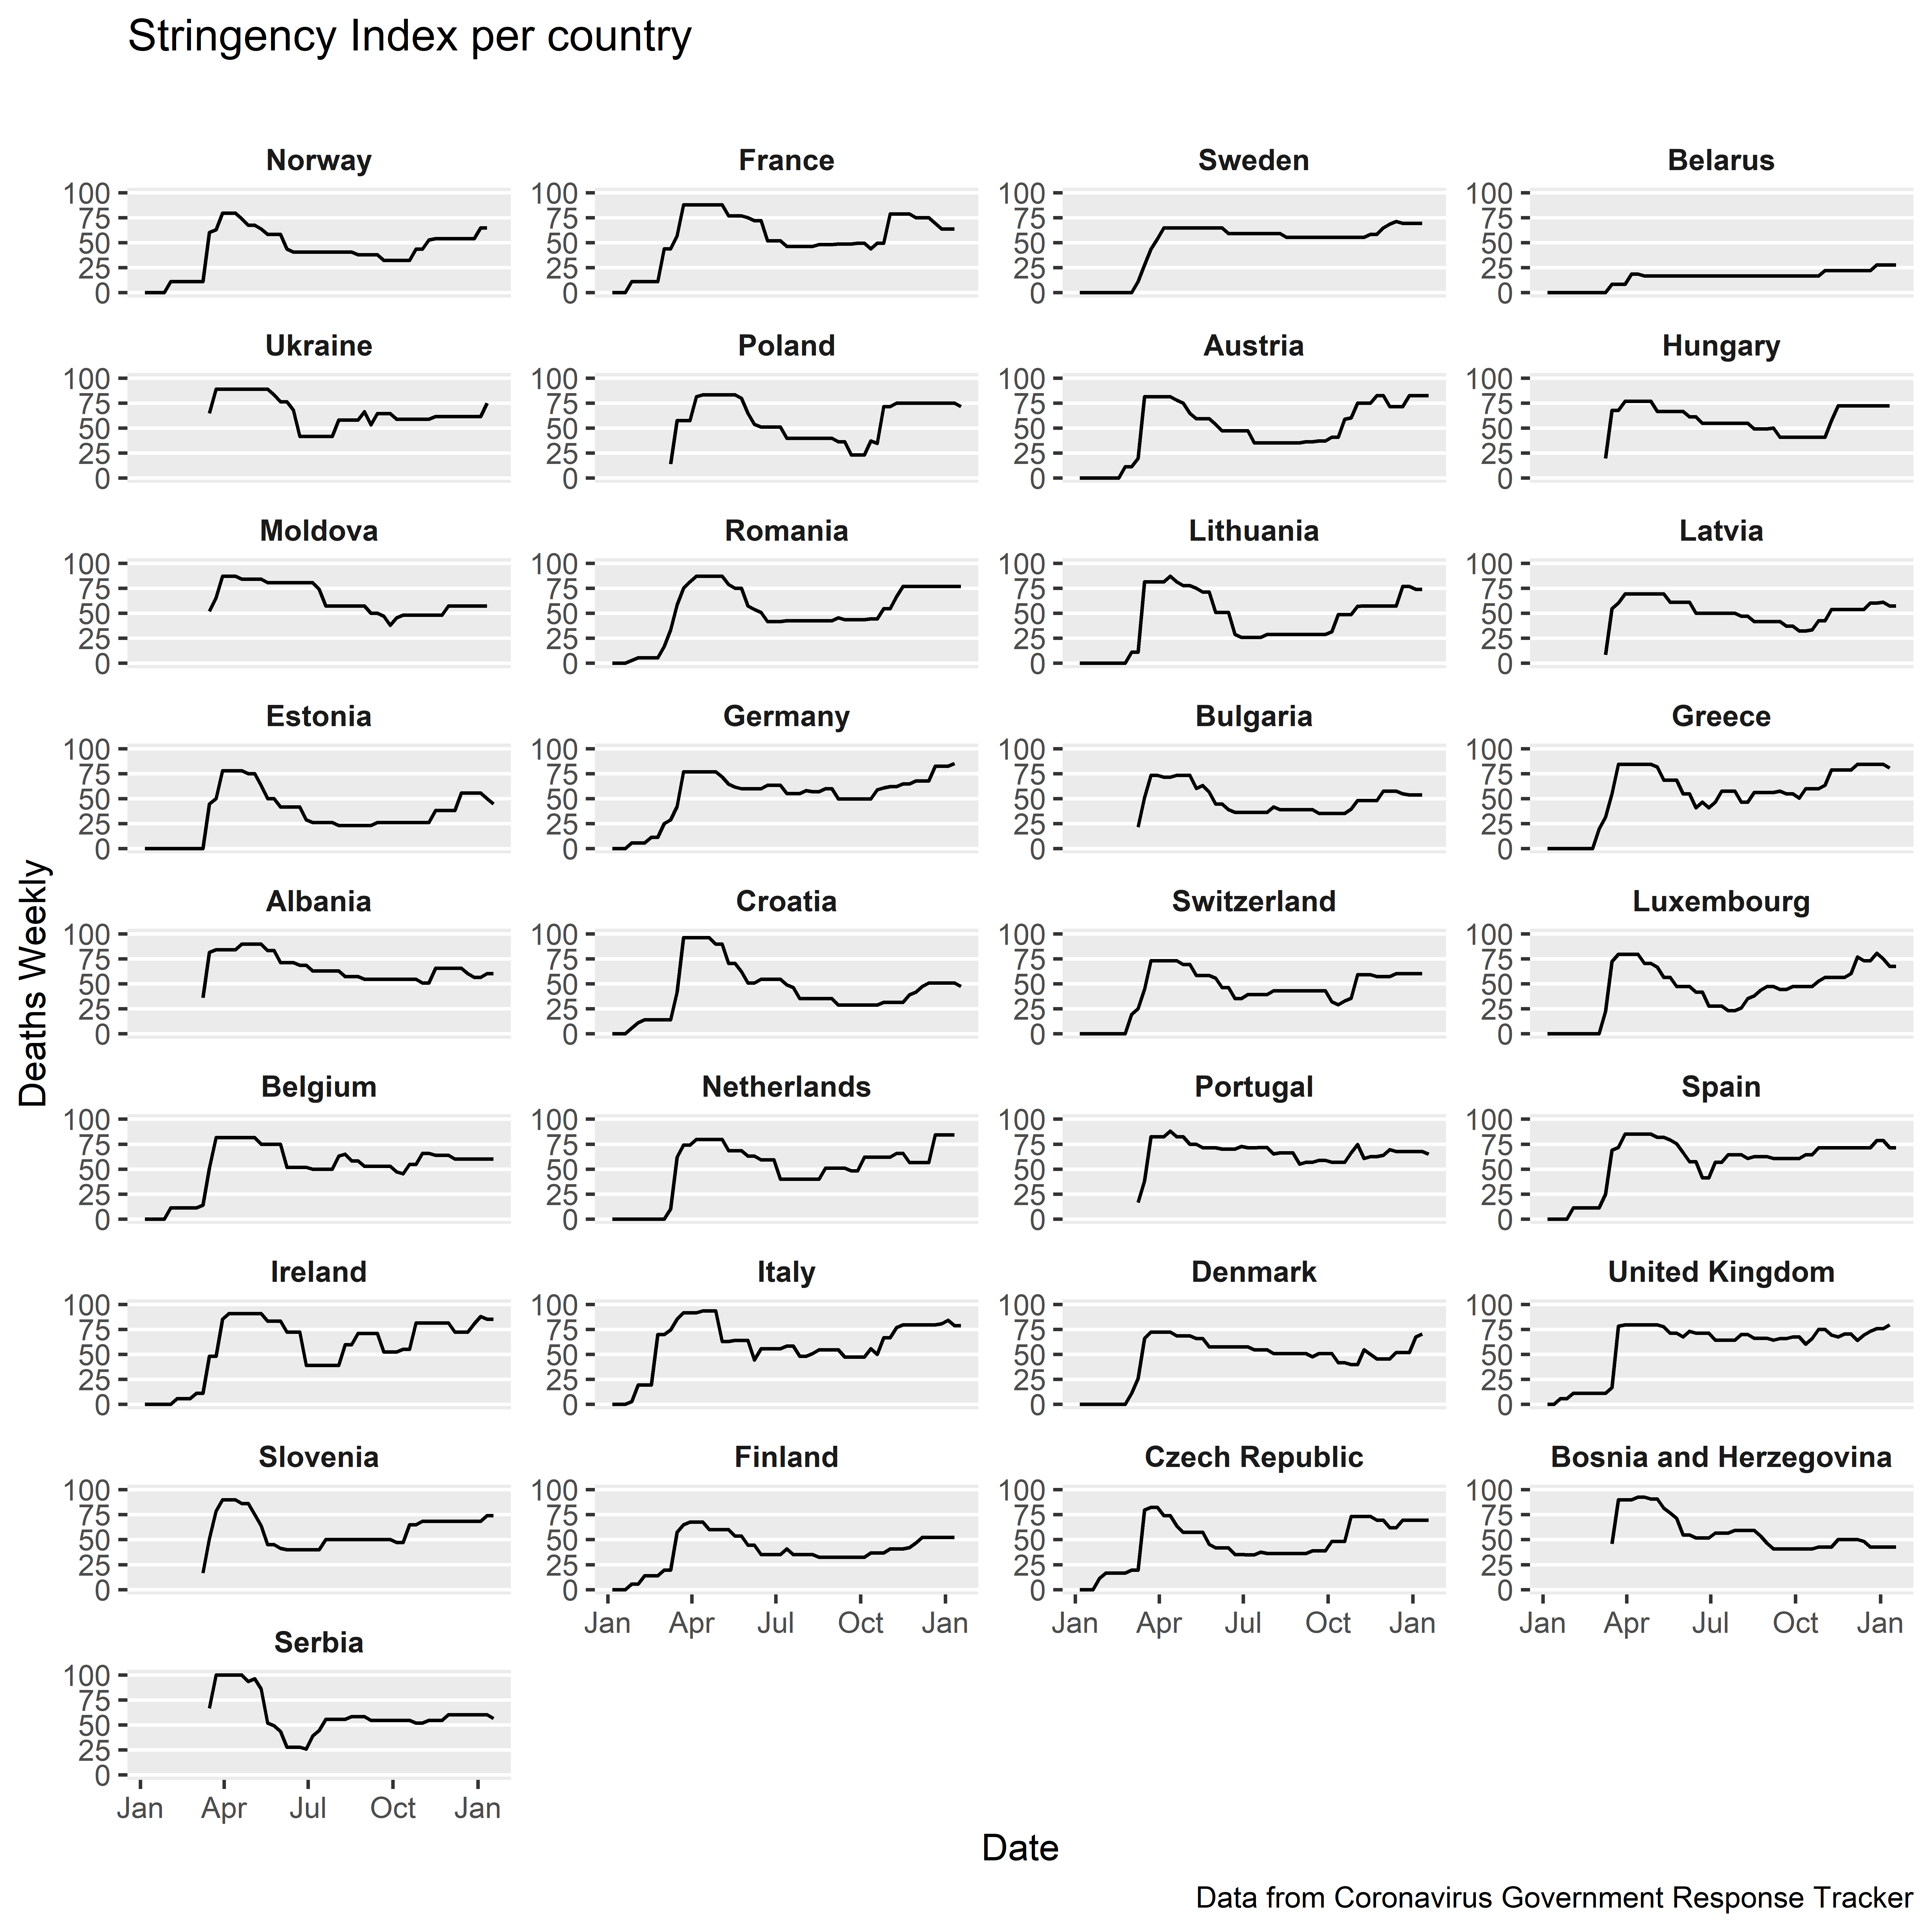 Stringency Index provided for each country